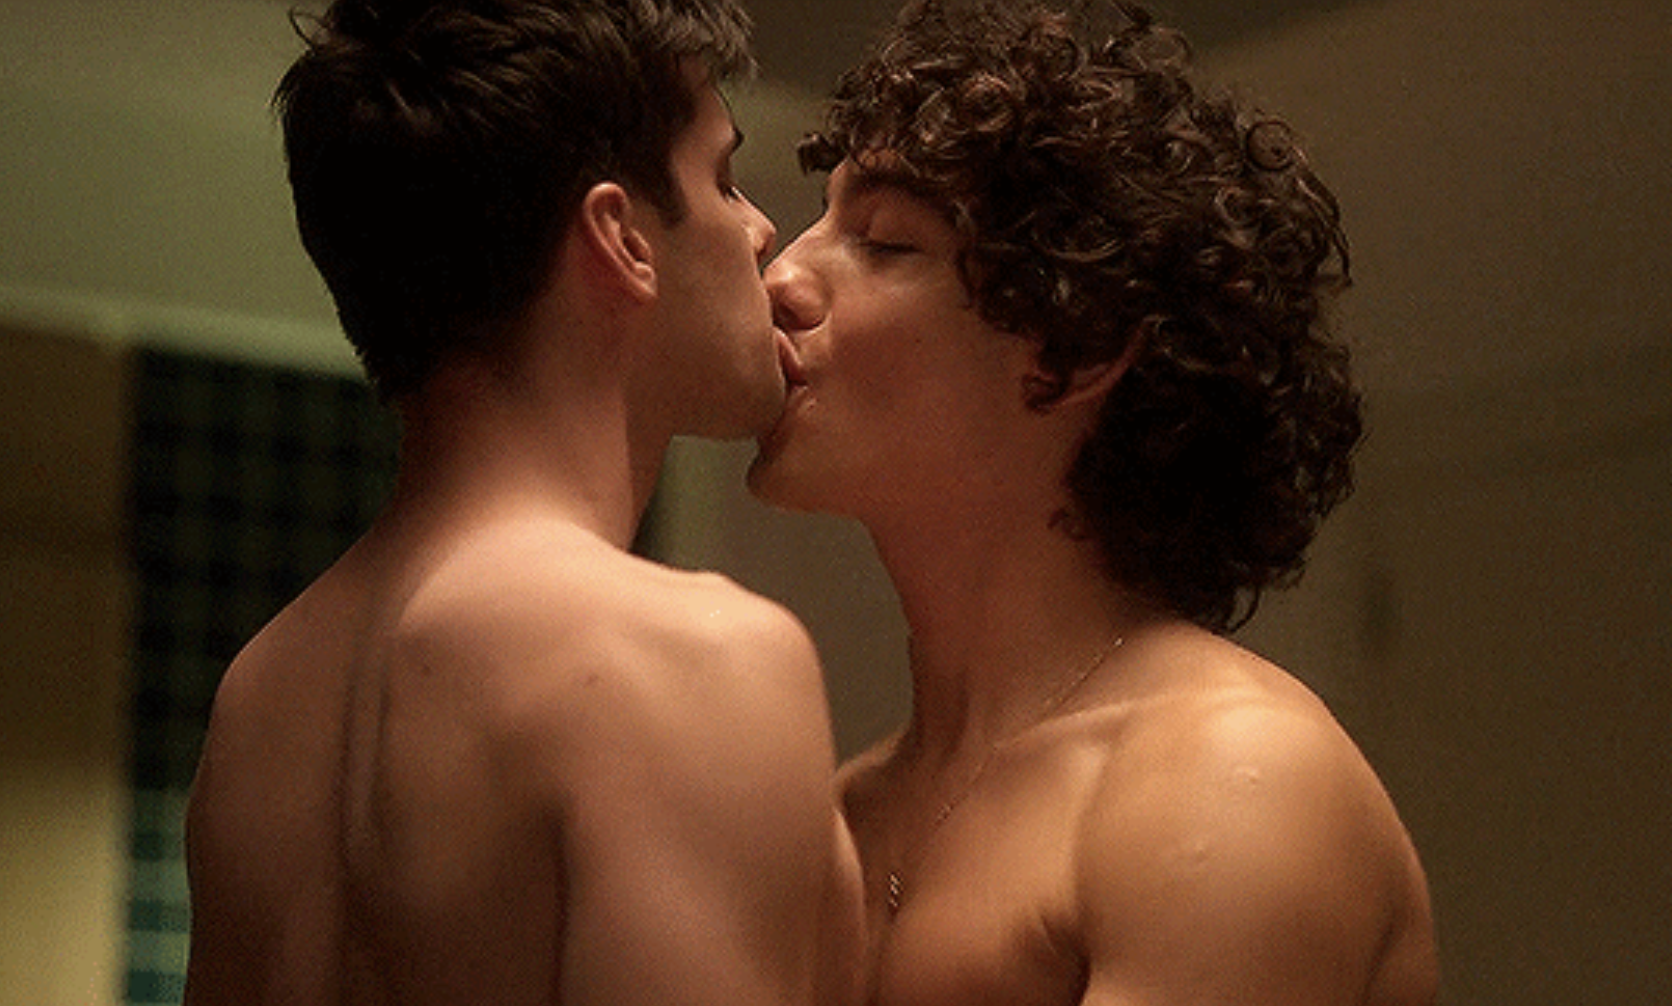 Gay male sex scenes in movies and tv shows